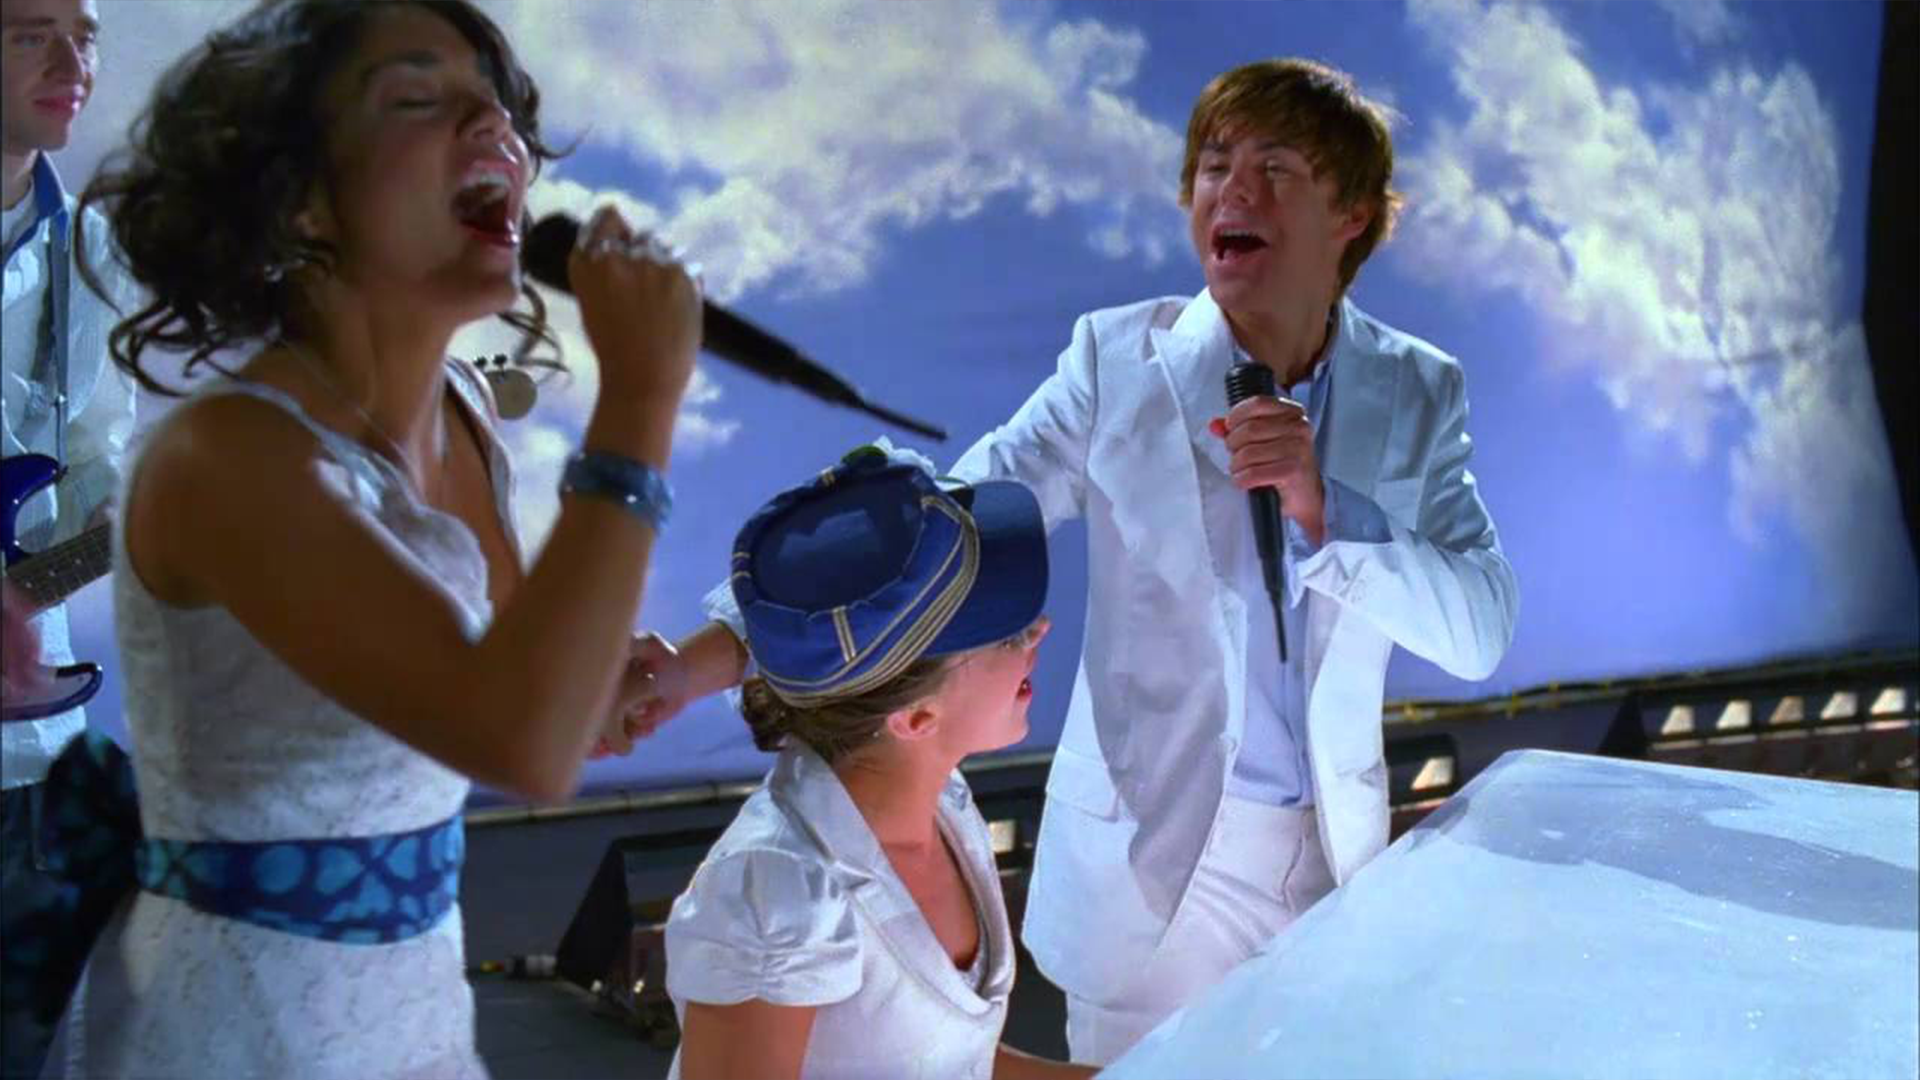 Characters from High School Musical 2